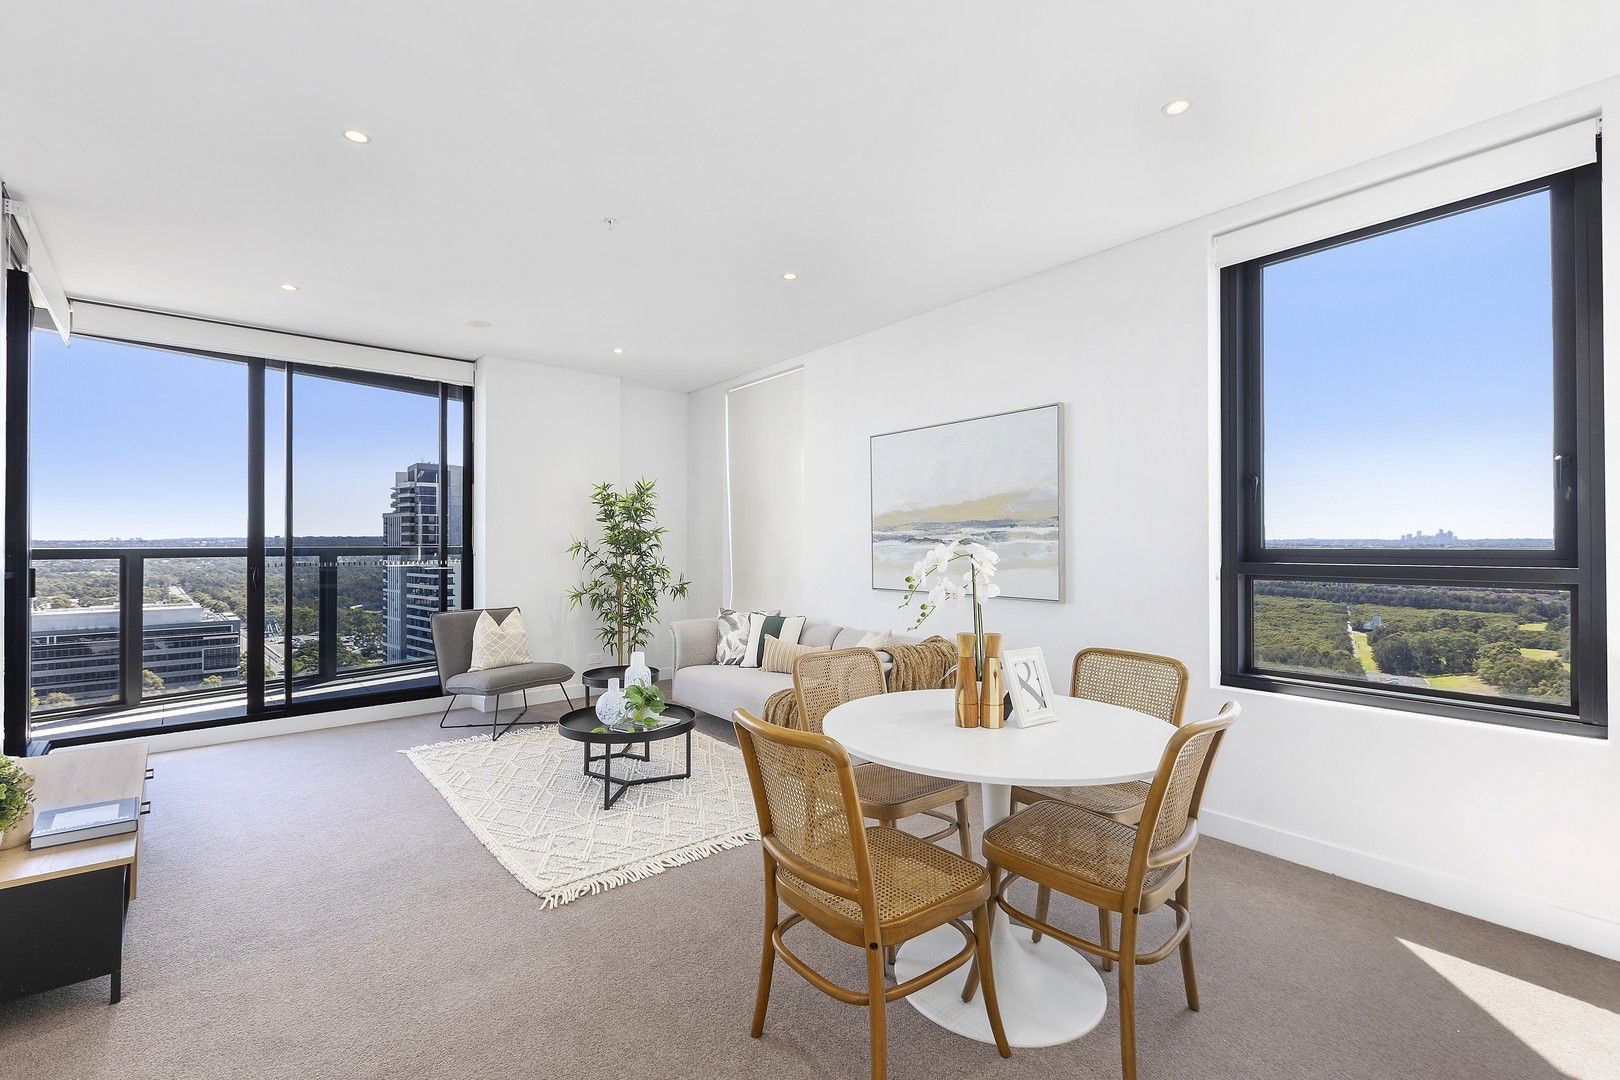 2 bedrooms Apartment / Unit / Flat in 21910/2B Figtree Drive SYDNEY OLYMPIC PARK NSW, 2127